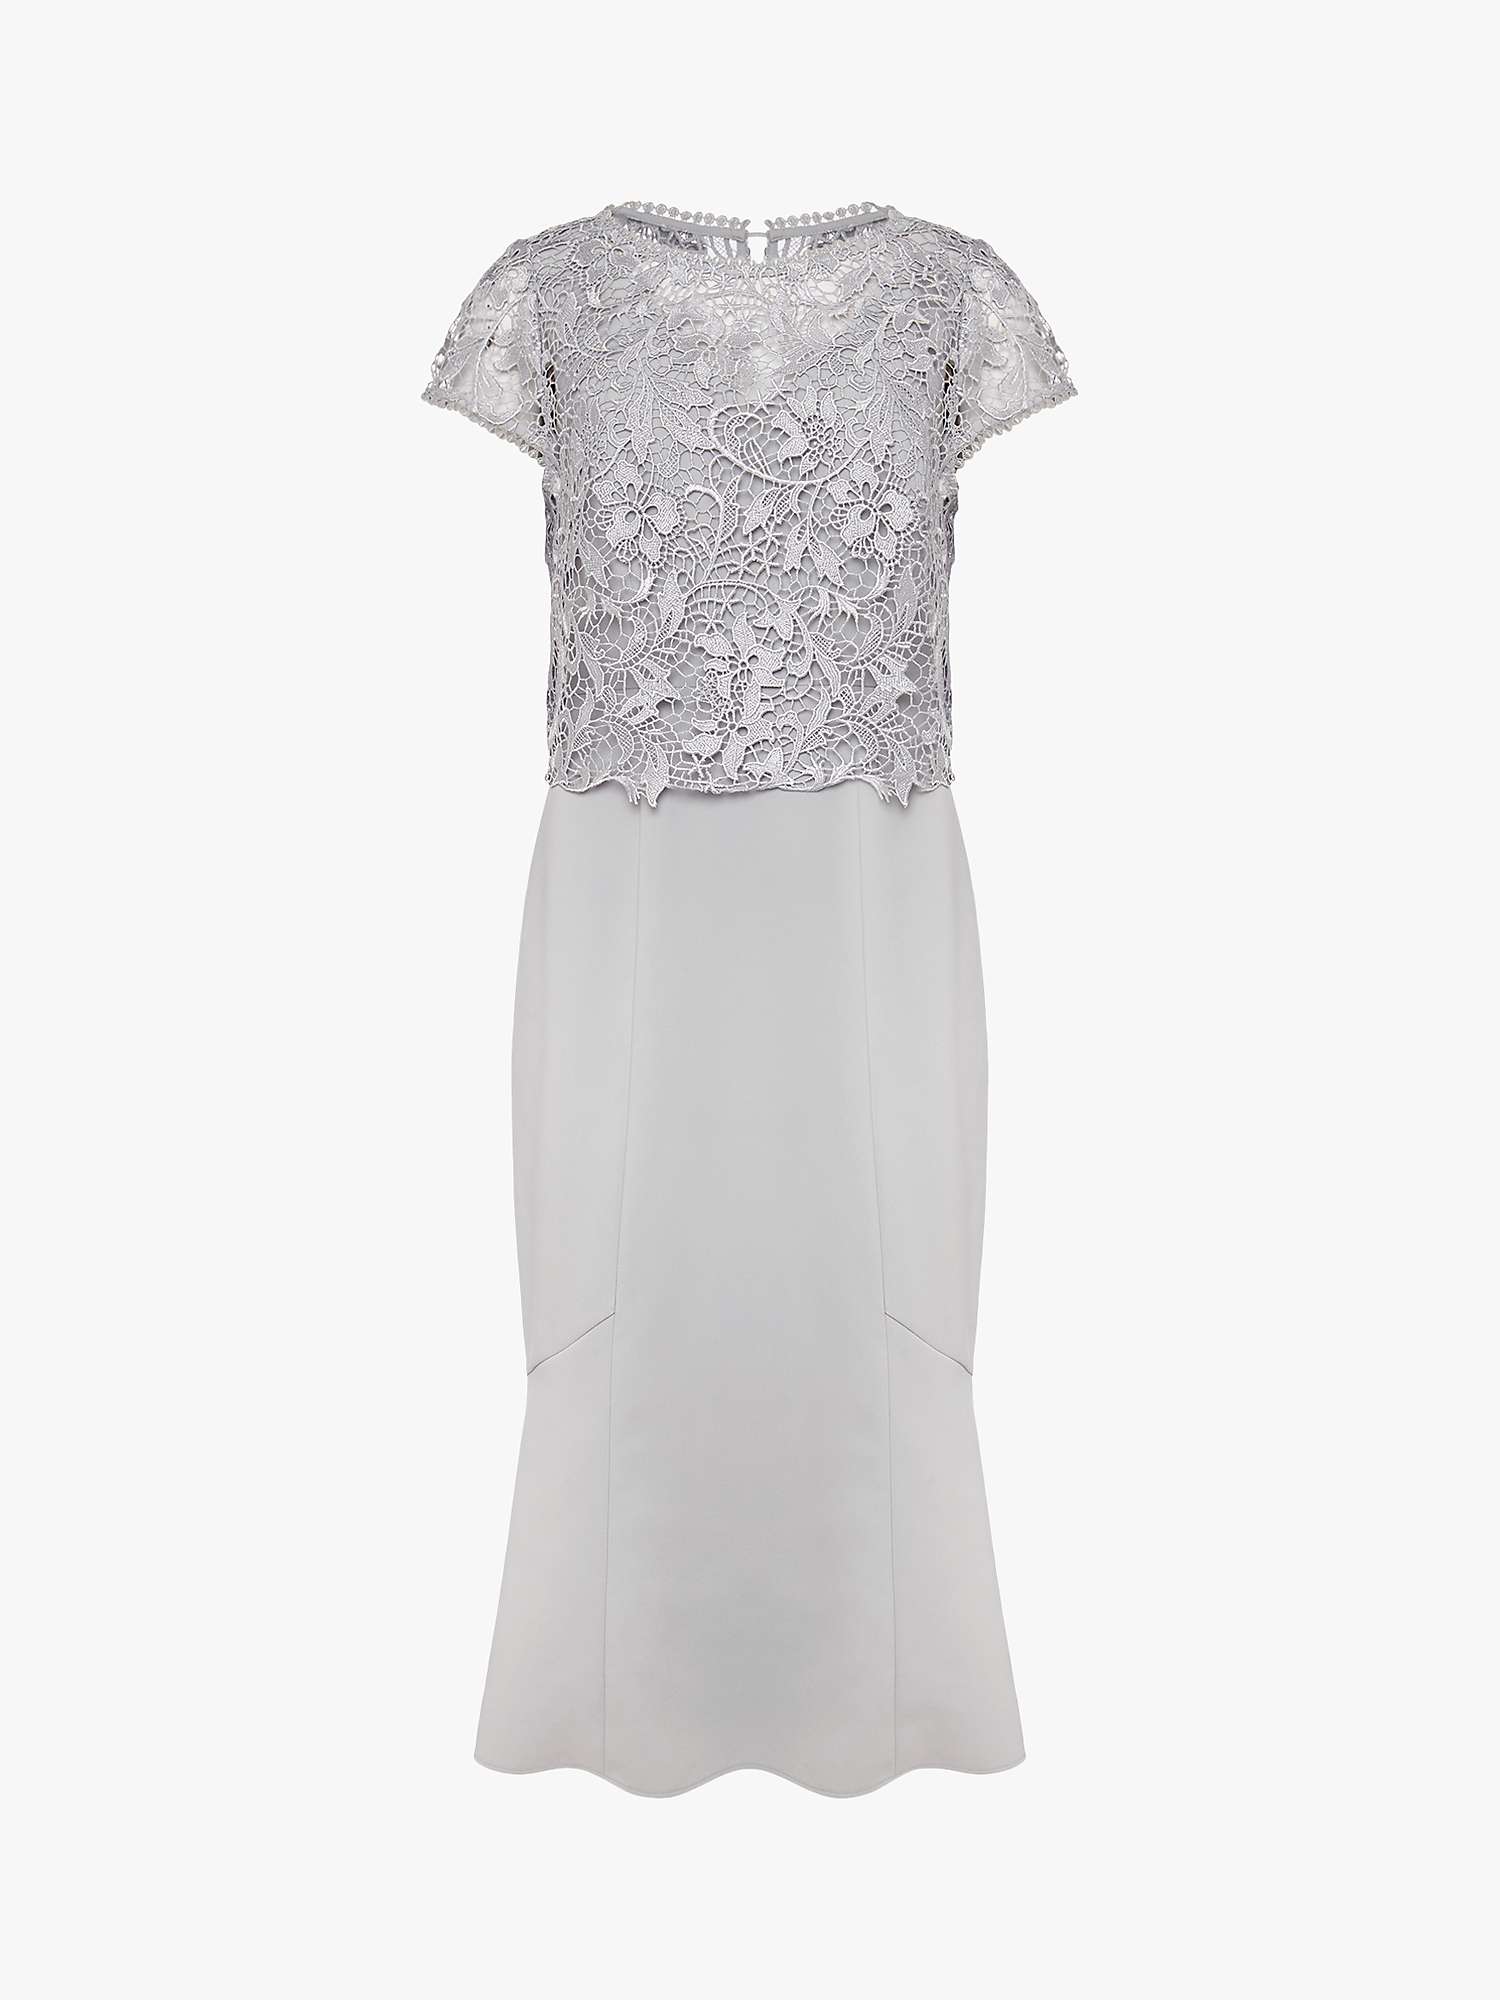 Buy Phase Eight Alisha Lace Bodice Scuba Dress, Mineral Online at johnlewis.com